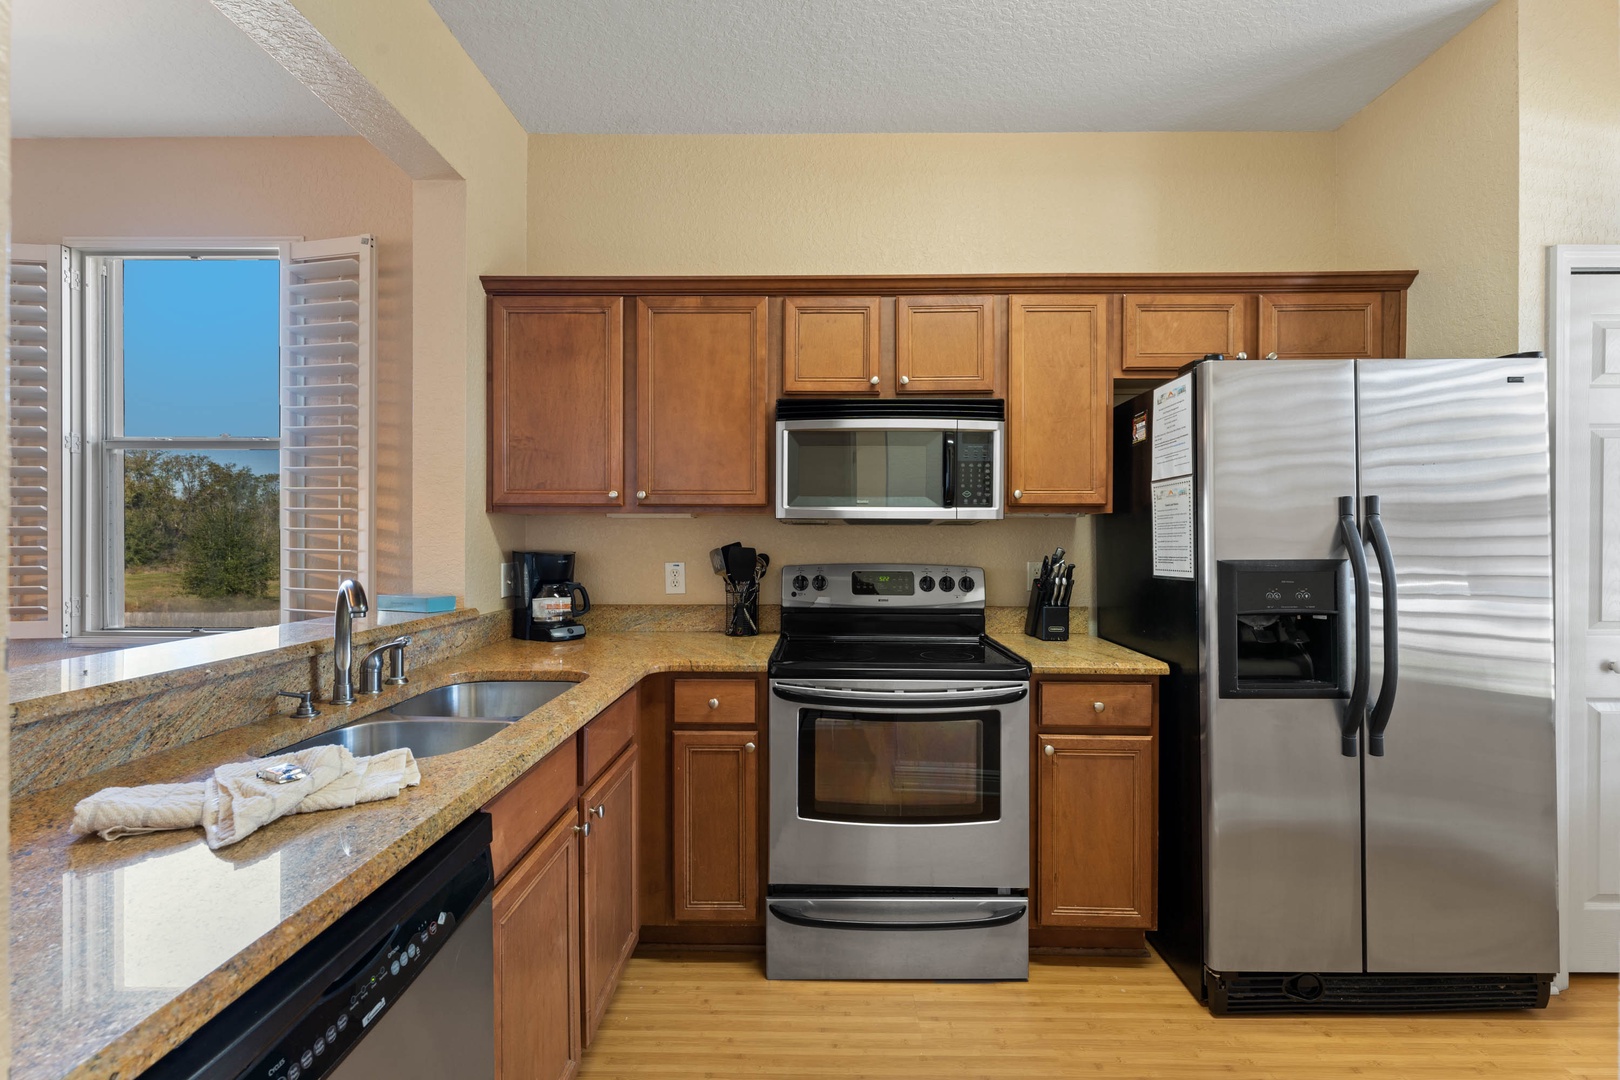 The updated kitchen offers loads of space & all the comforts of home